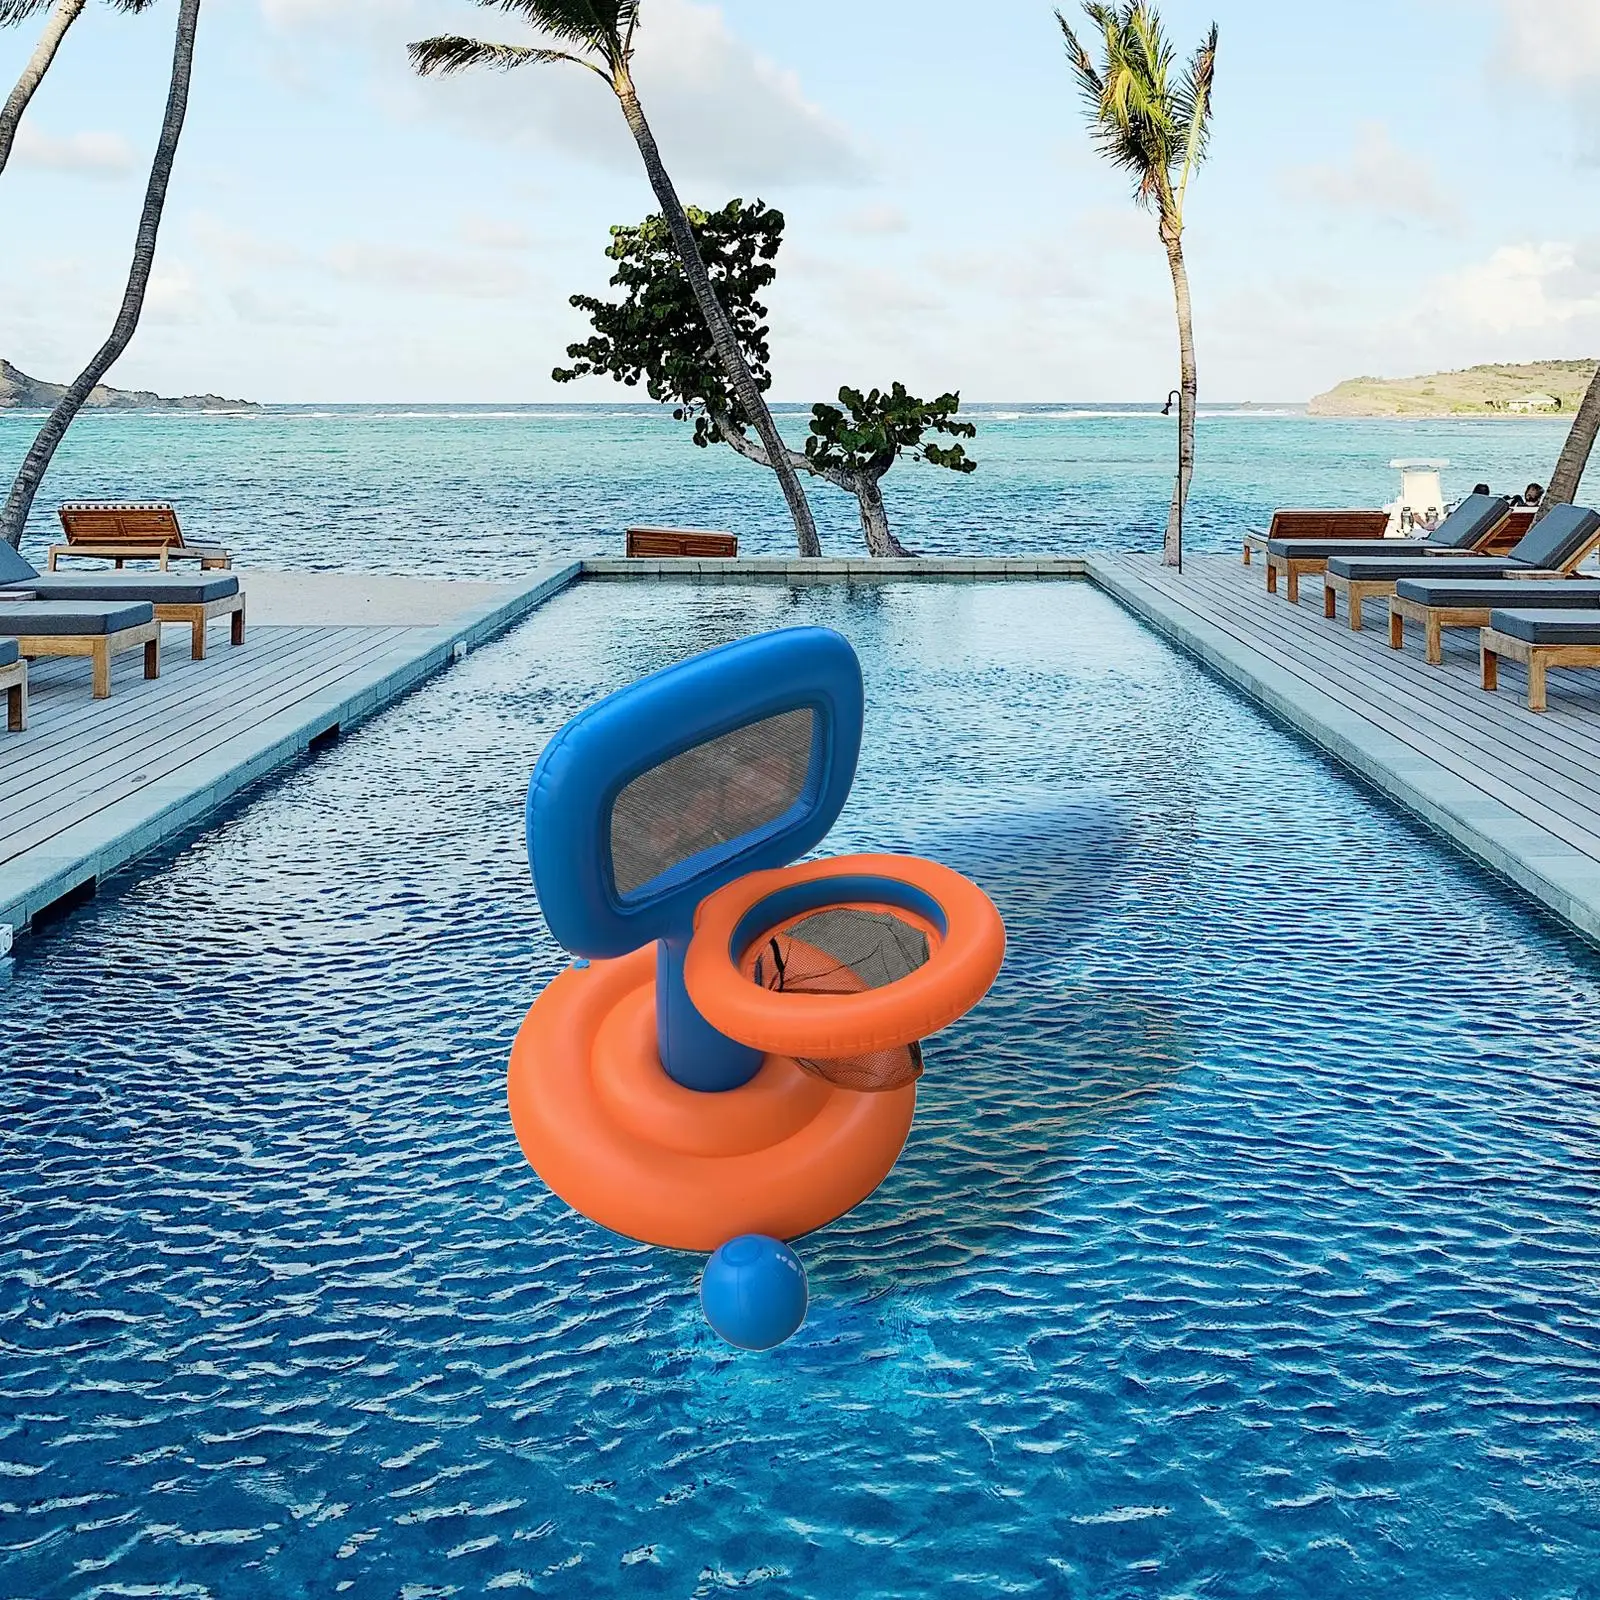 Funny Inflatable Pools Basketball Hoop Swimming Floating Hoop Beach with Ball Birthday Gifts Playing for Garden, Lake Ocean